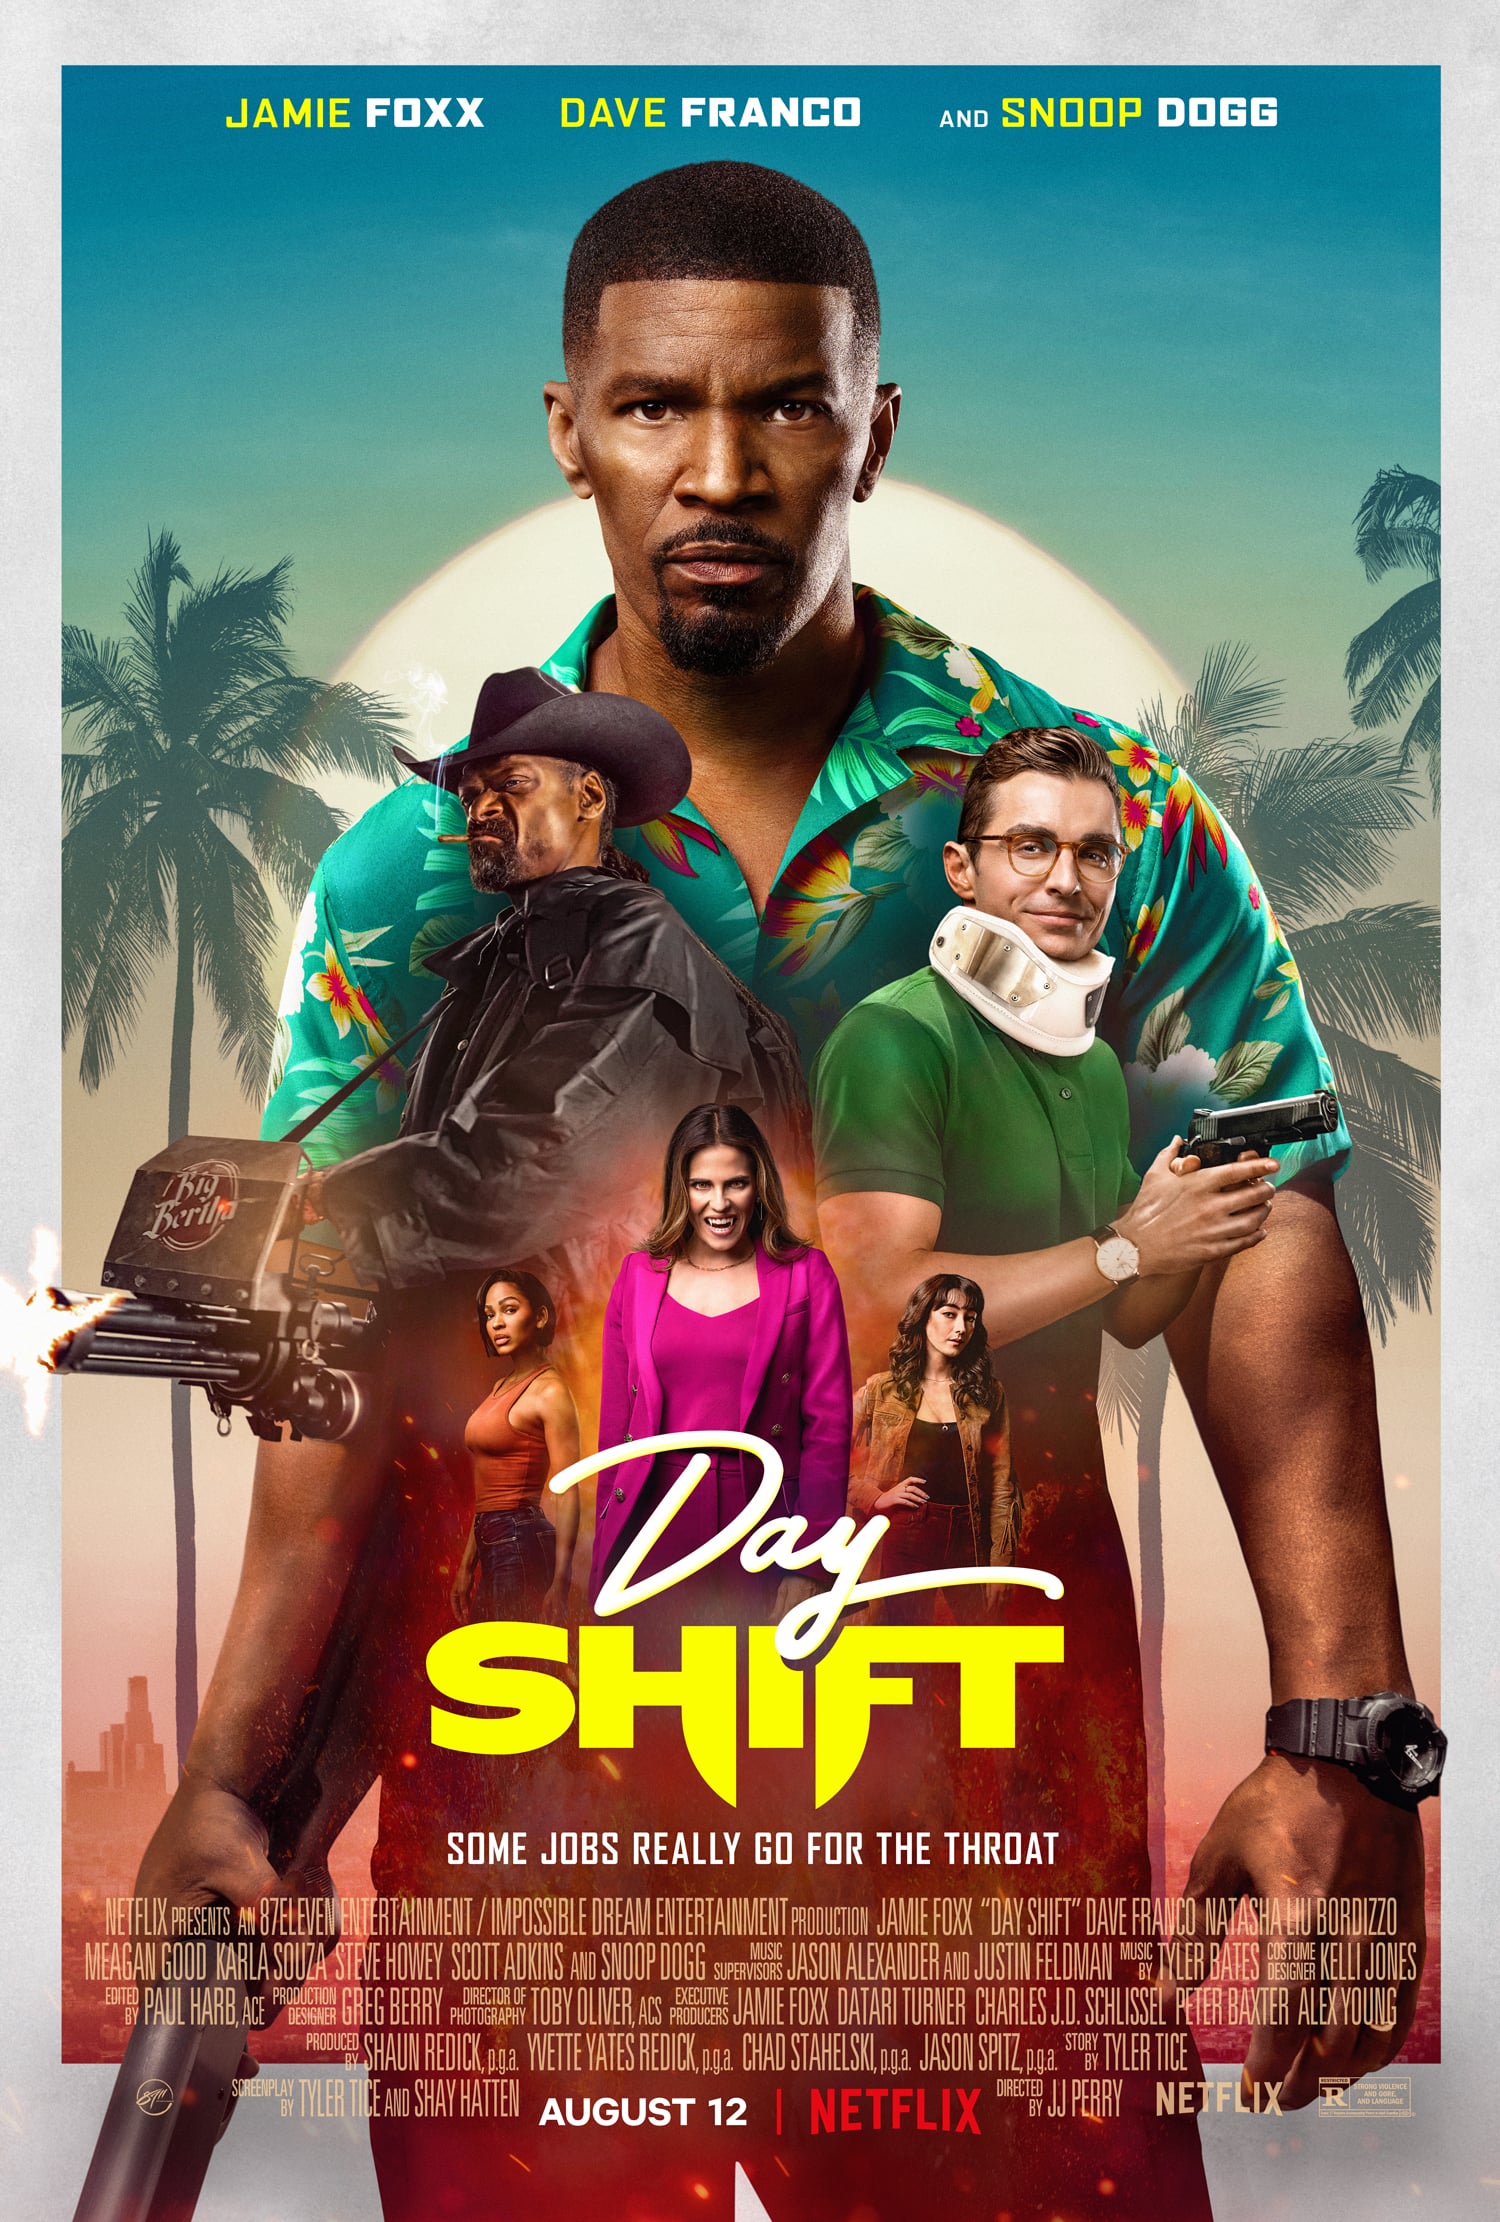 Day Shift" Poster | Jamie Foxx, Dave Franco, and Snoop Dogg Hunt Down  Vampires in Netflix's "Day Shift" Trailer | POPSUGAR Entertainment Photo 6